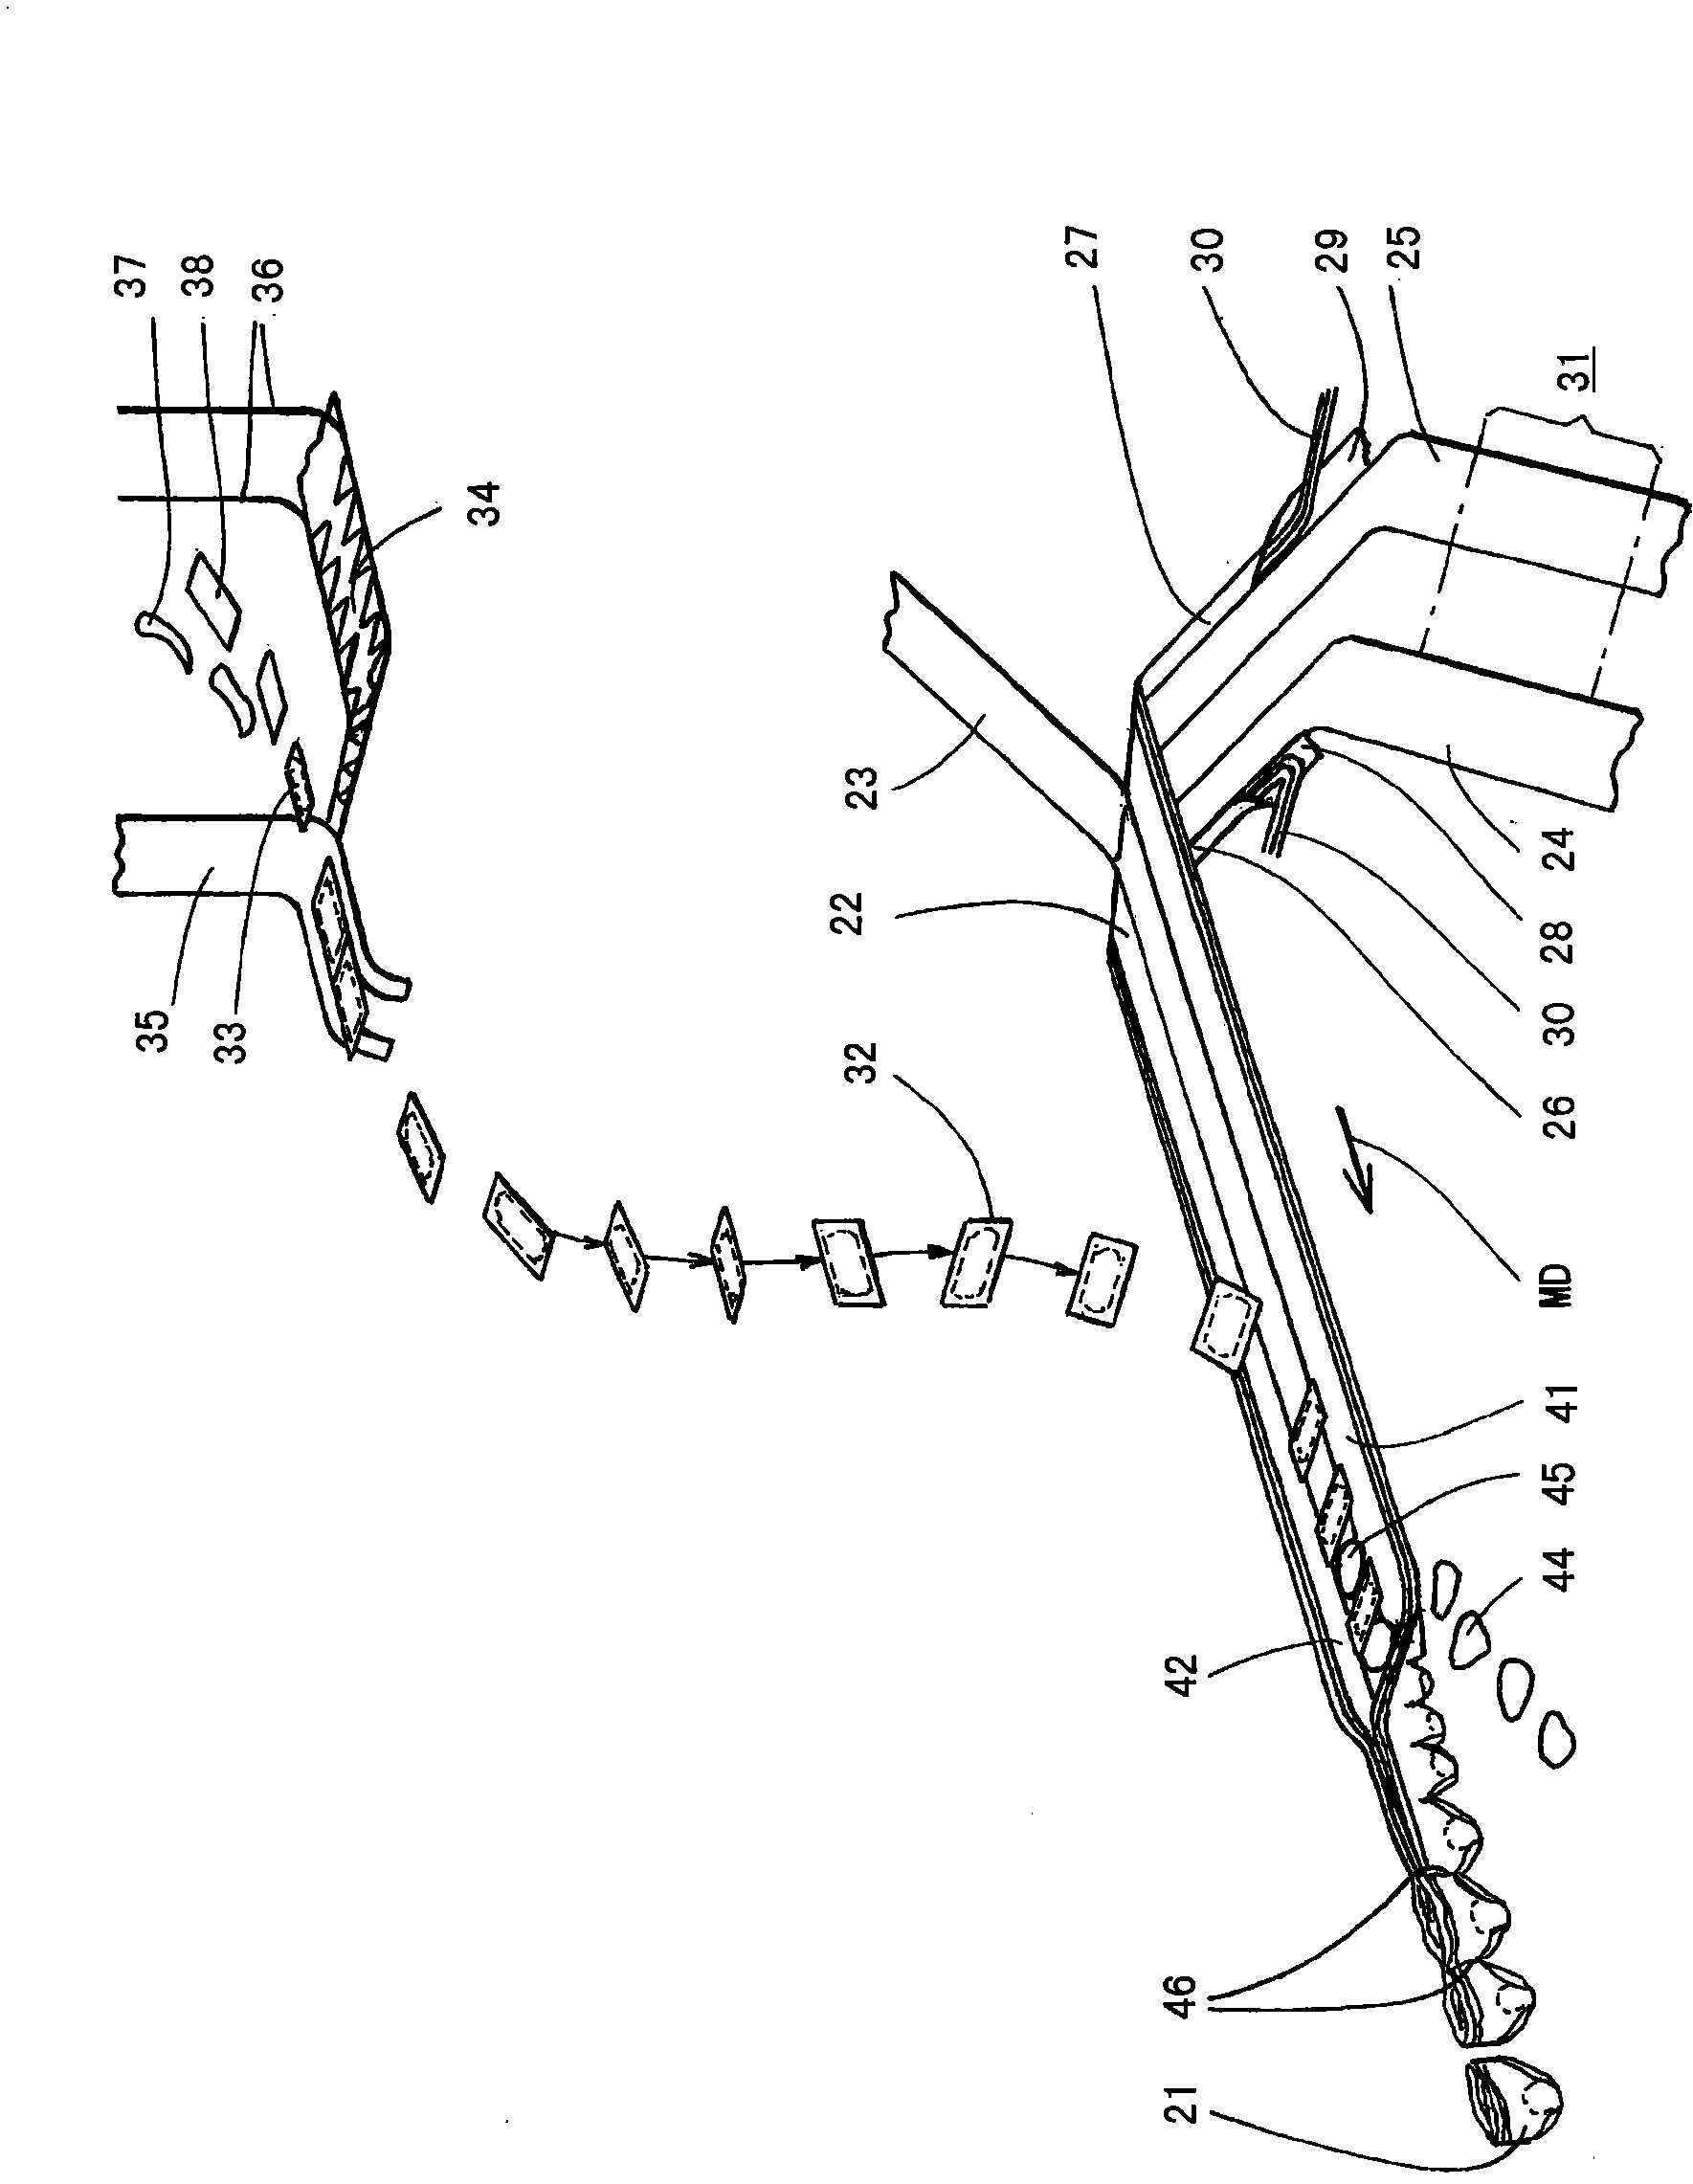 Method for producing pant-type articles having a chassis structure and pant-type articles produced according to the method